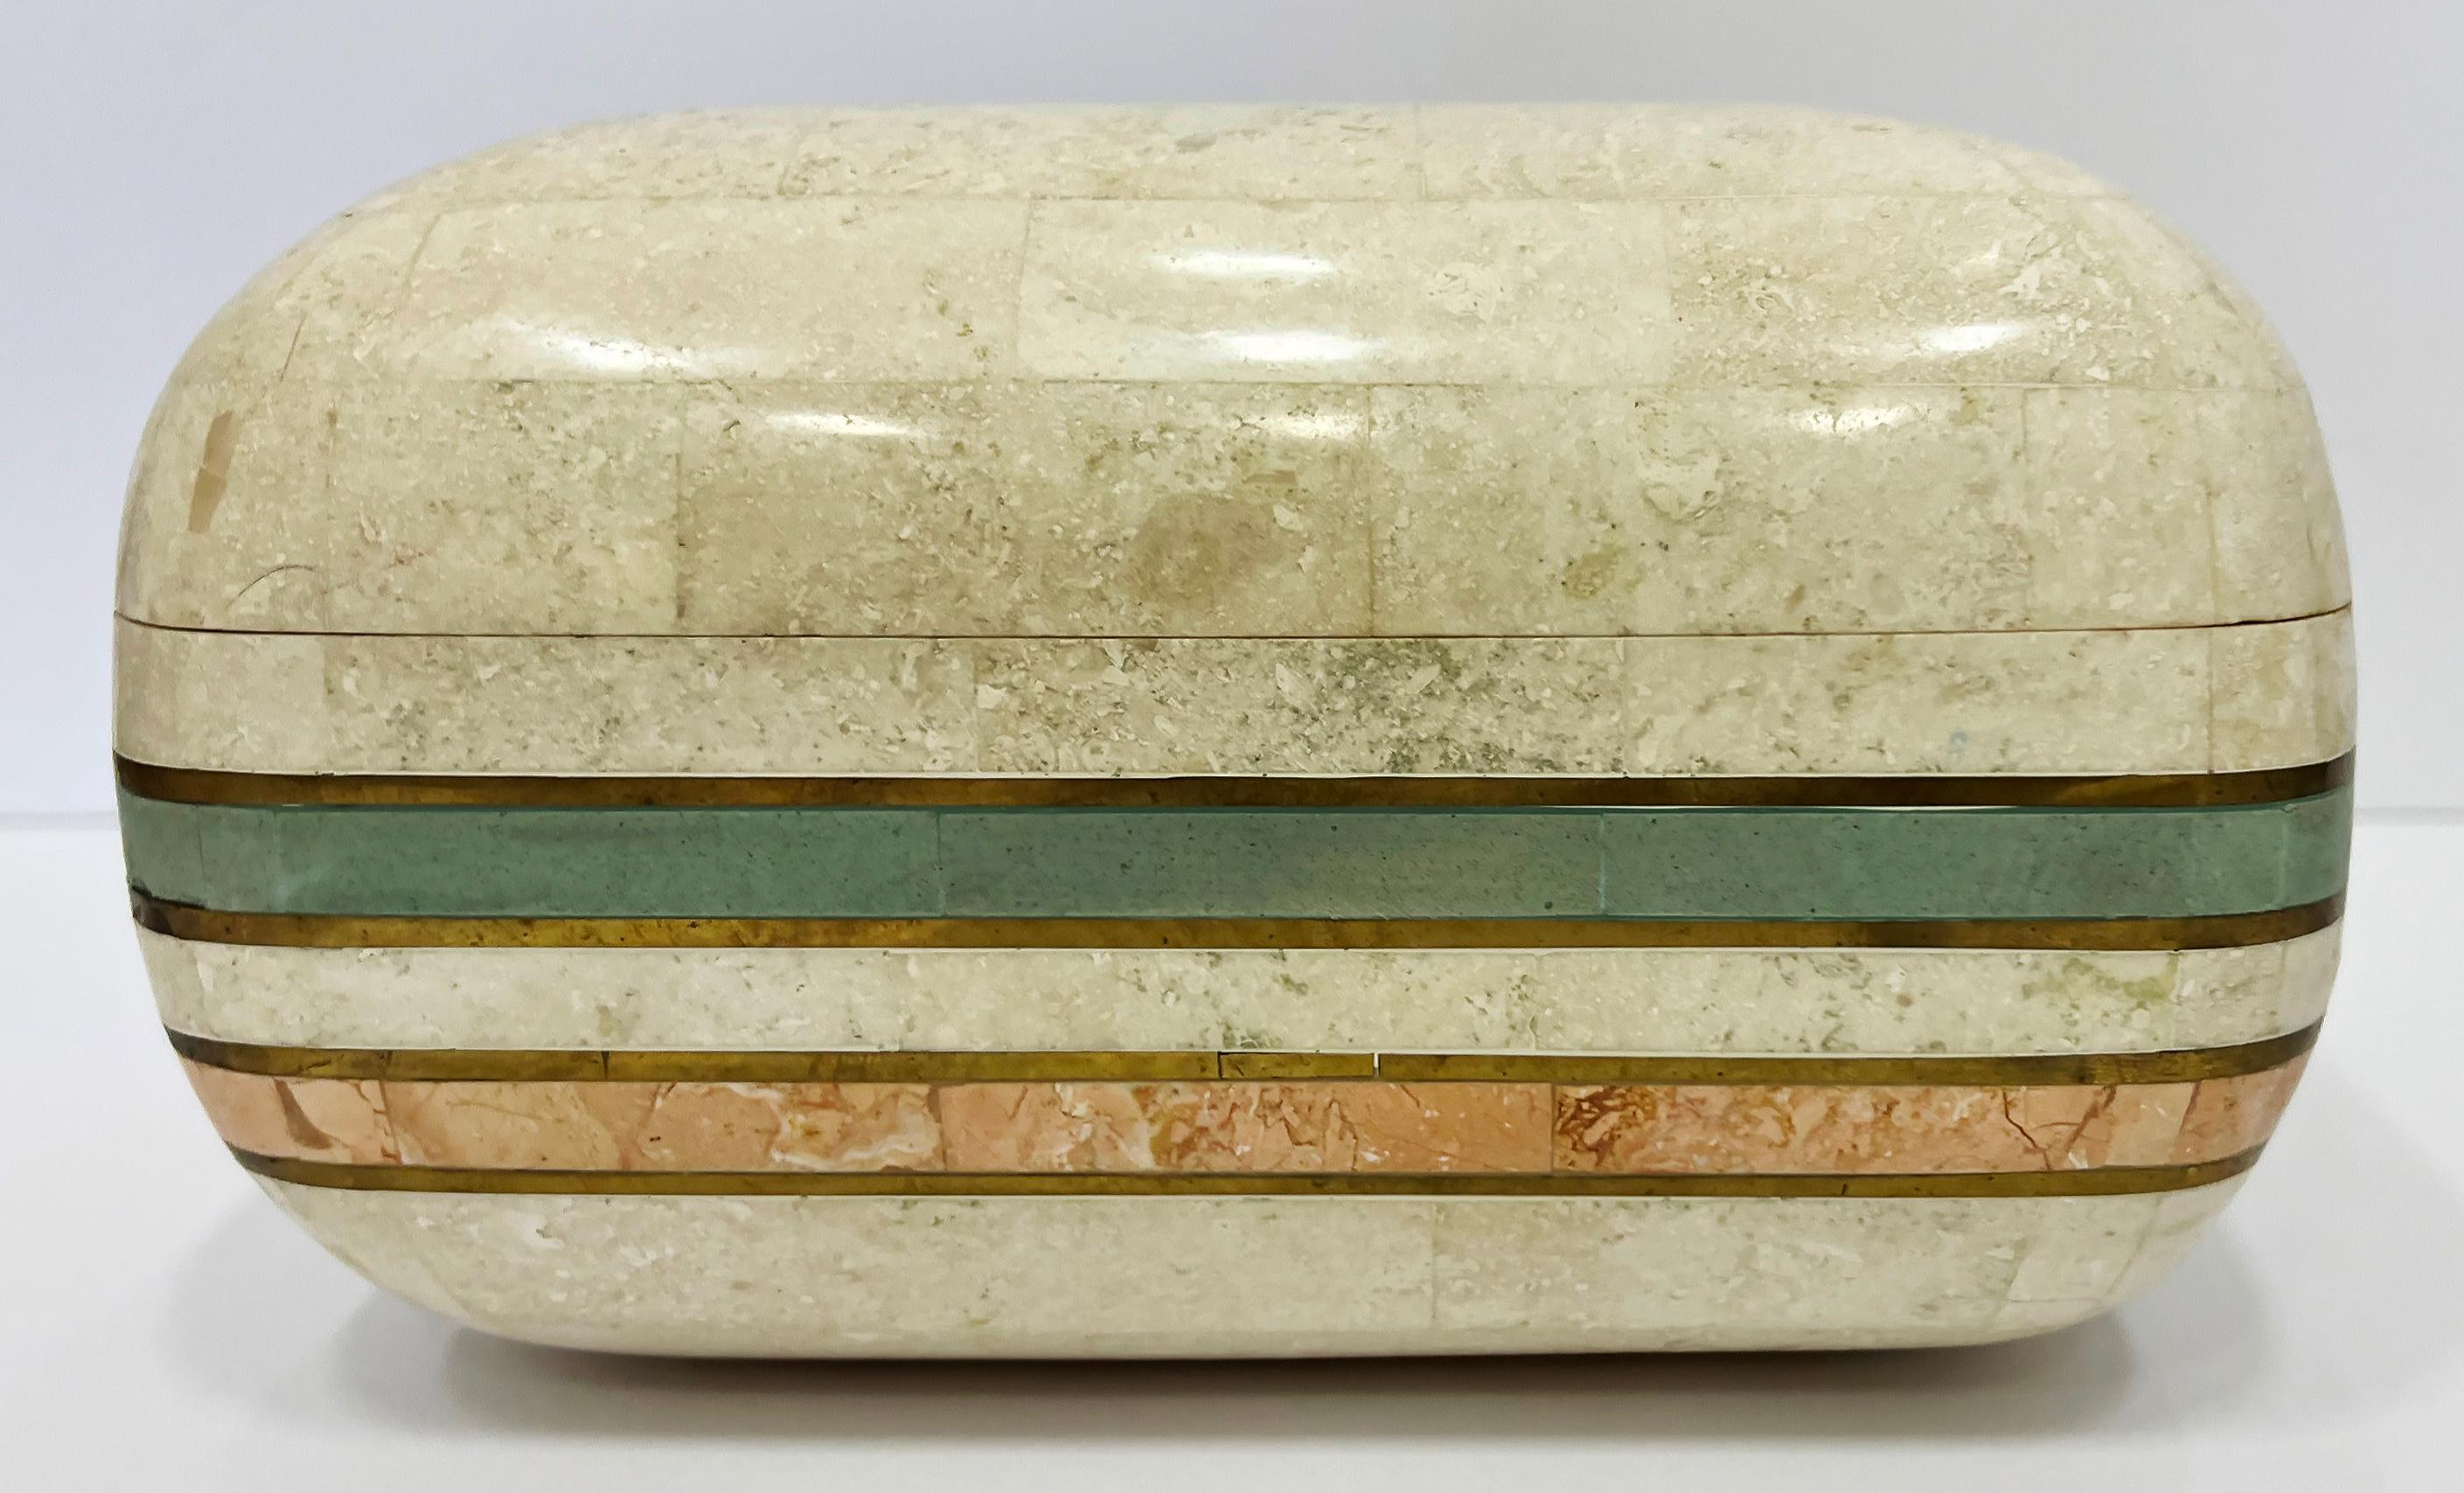 1980s Tessellated Stone Box with Brass Trim, Maitland Smith Attributed

Offered for sale is a 1980s lidded tessellated stone decorative box with accent color stone and inset brass trim. The box has rounded corners and the lid hinges for access. The